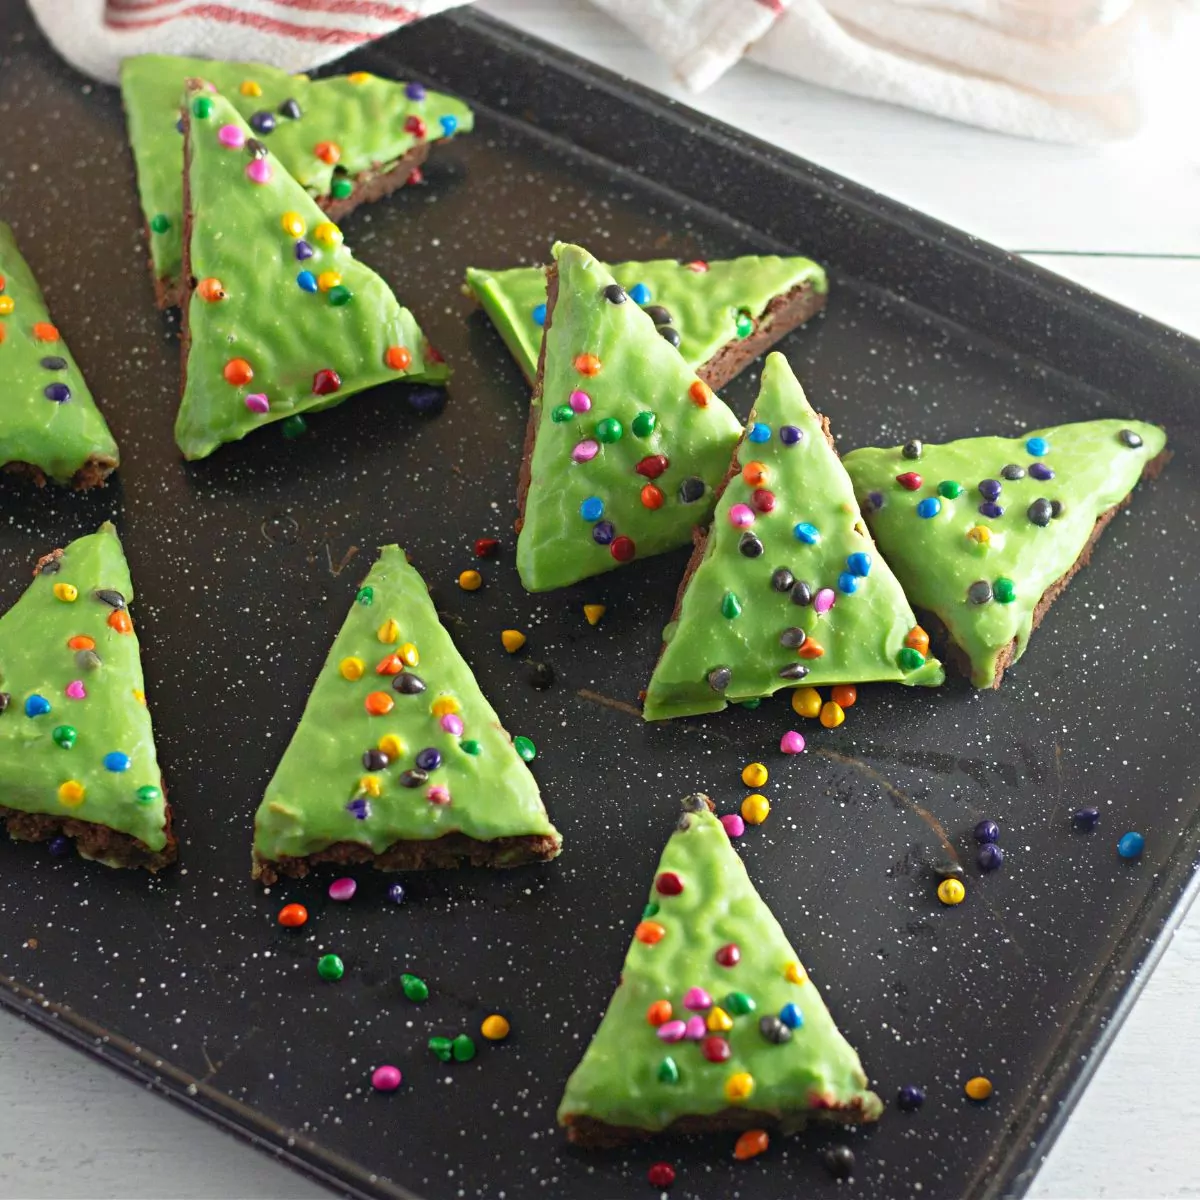 Decorated Christmas Shaped Brownies from a boxed mix.